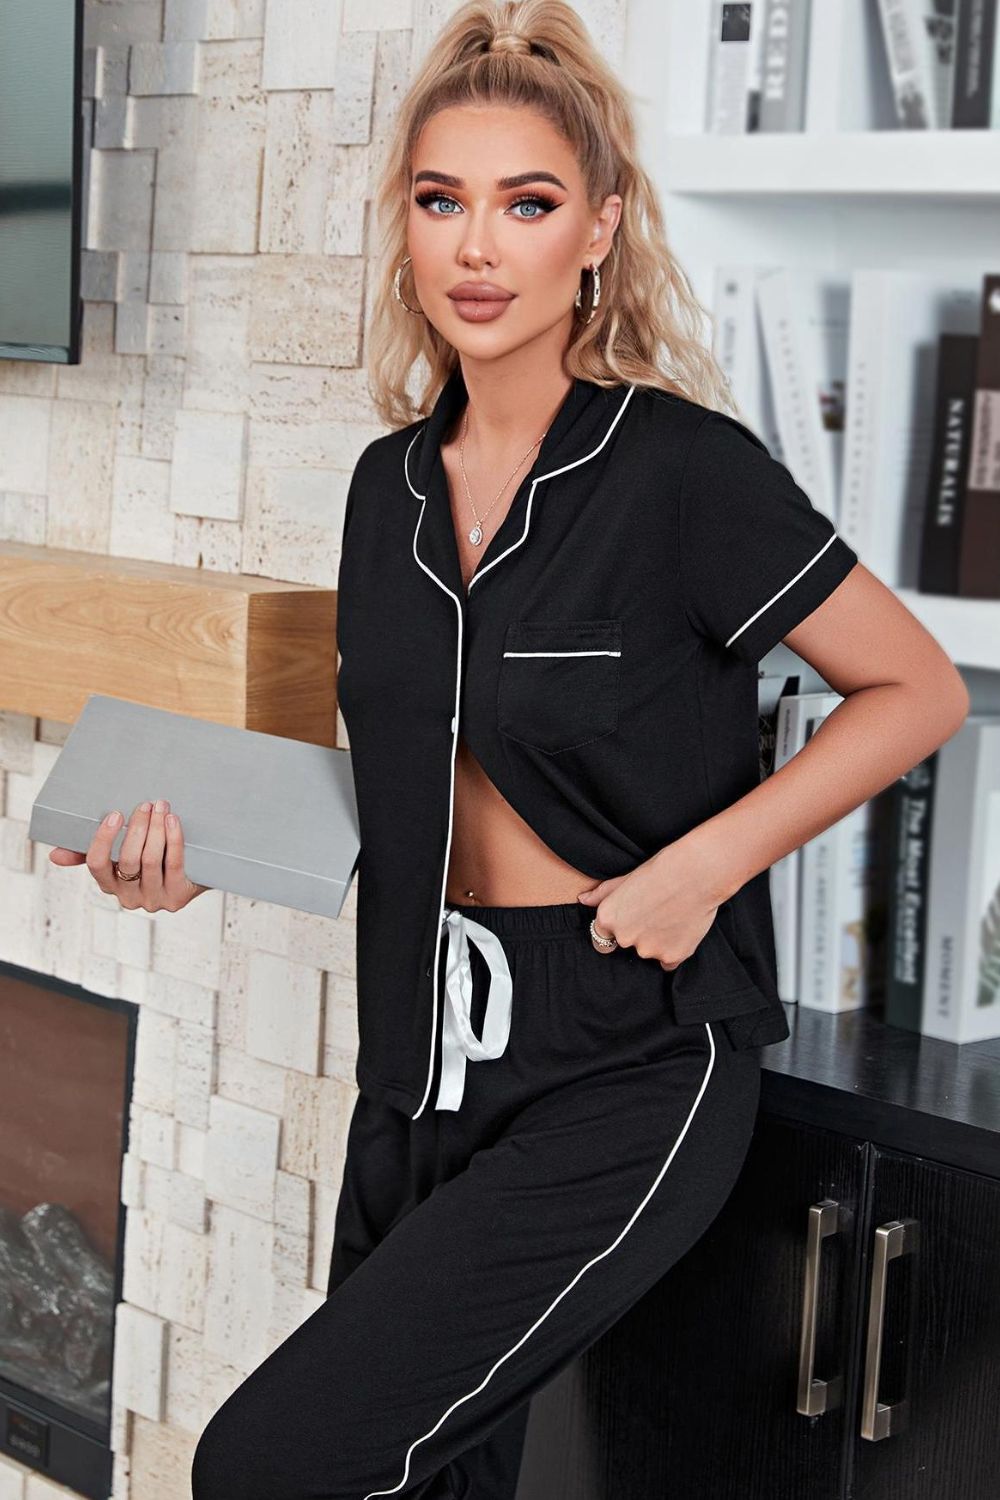 Contrast Piping Short Sleeve Top and Pants Pajama Set - Fashion Girl Online Store